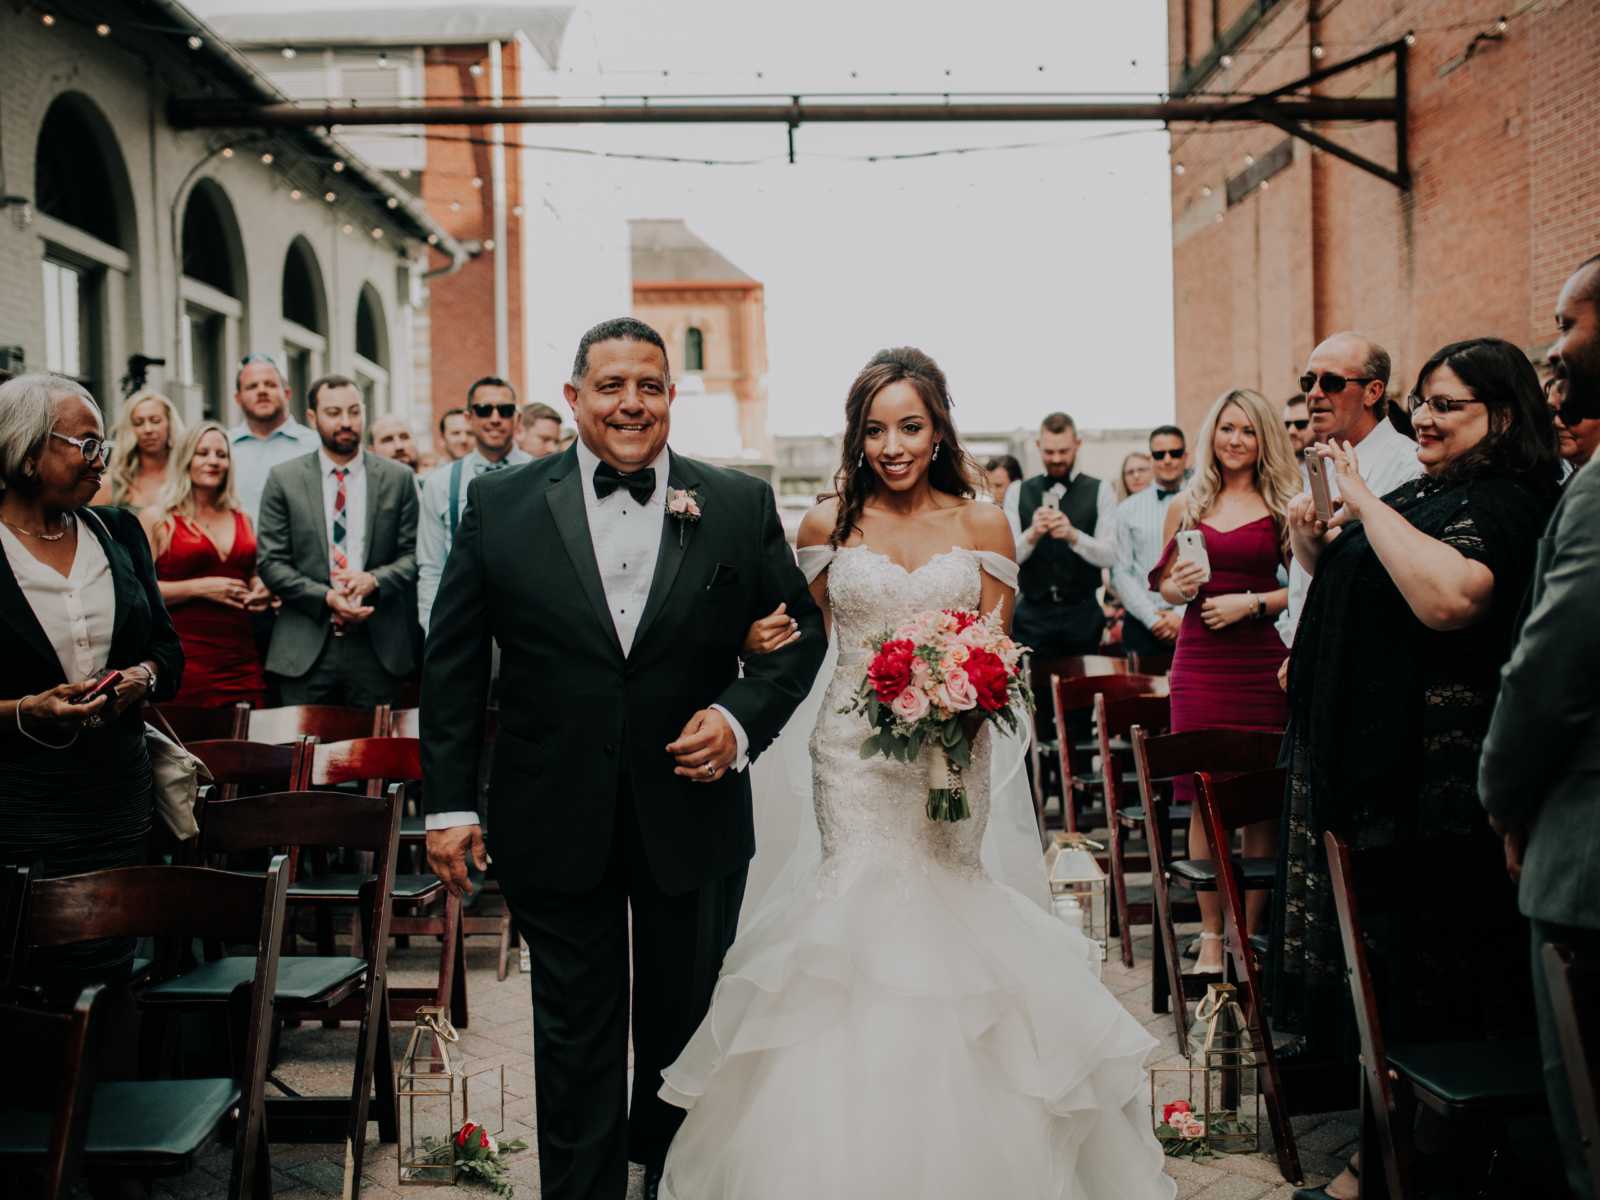 Father and daughter smile as father walks daughter down the aisle while crowd watches